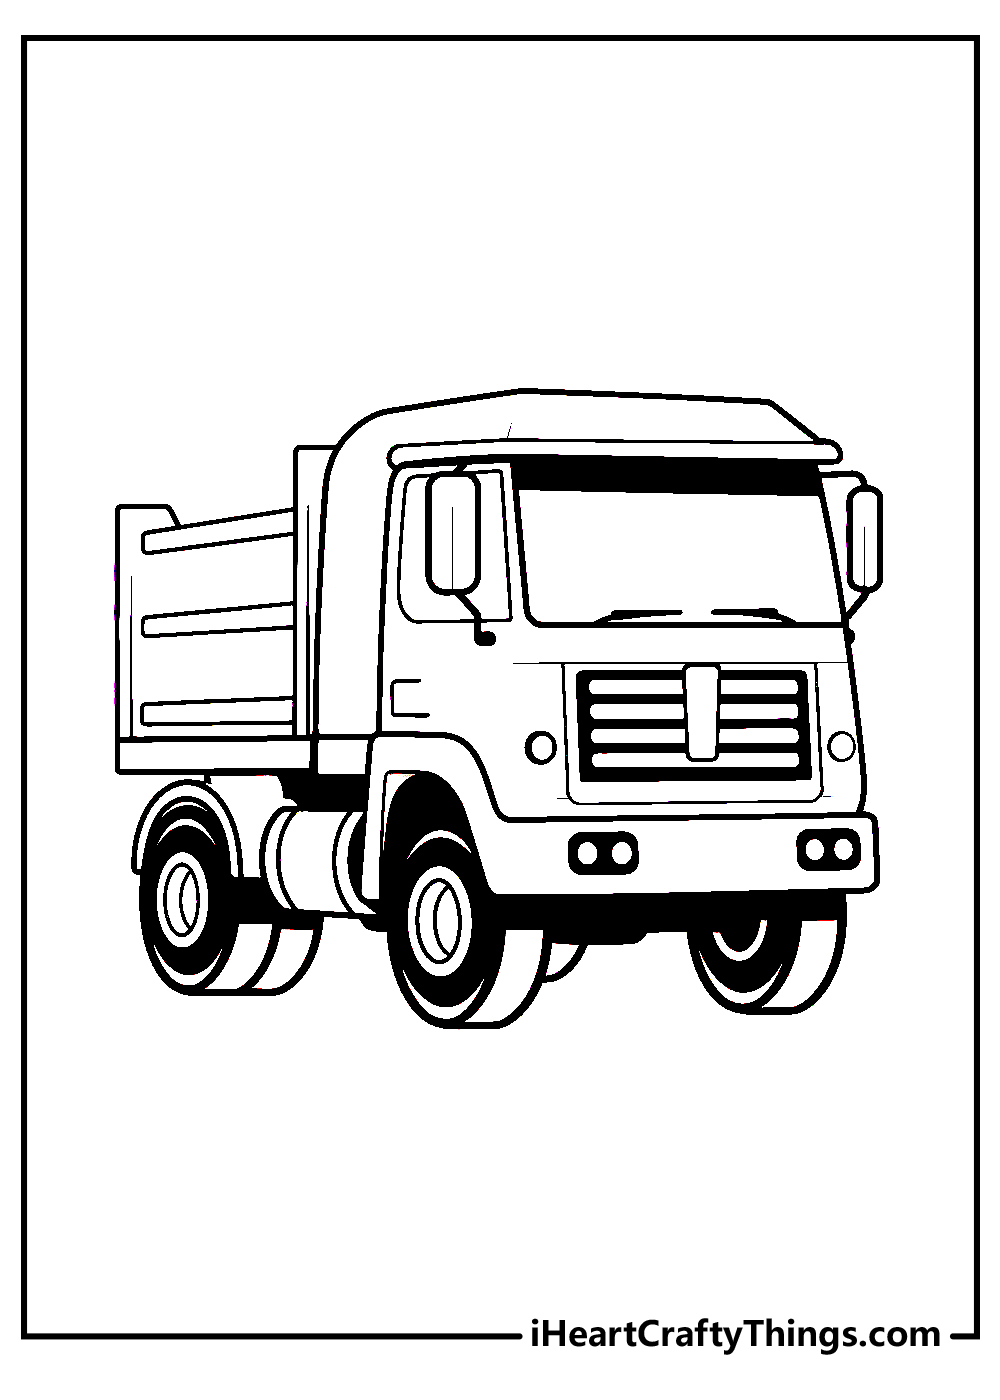 dump truck black-and-white coloring printable